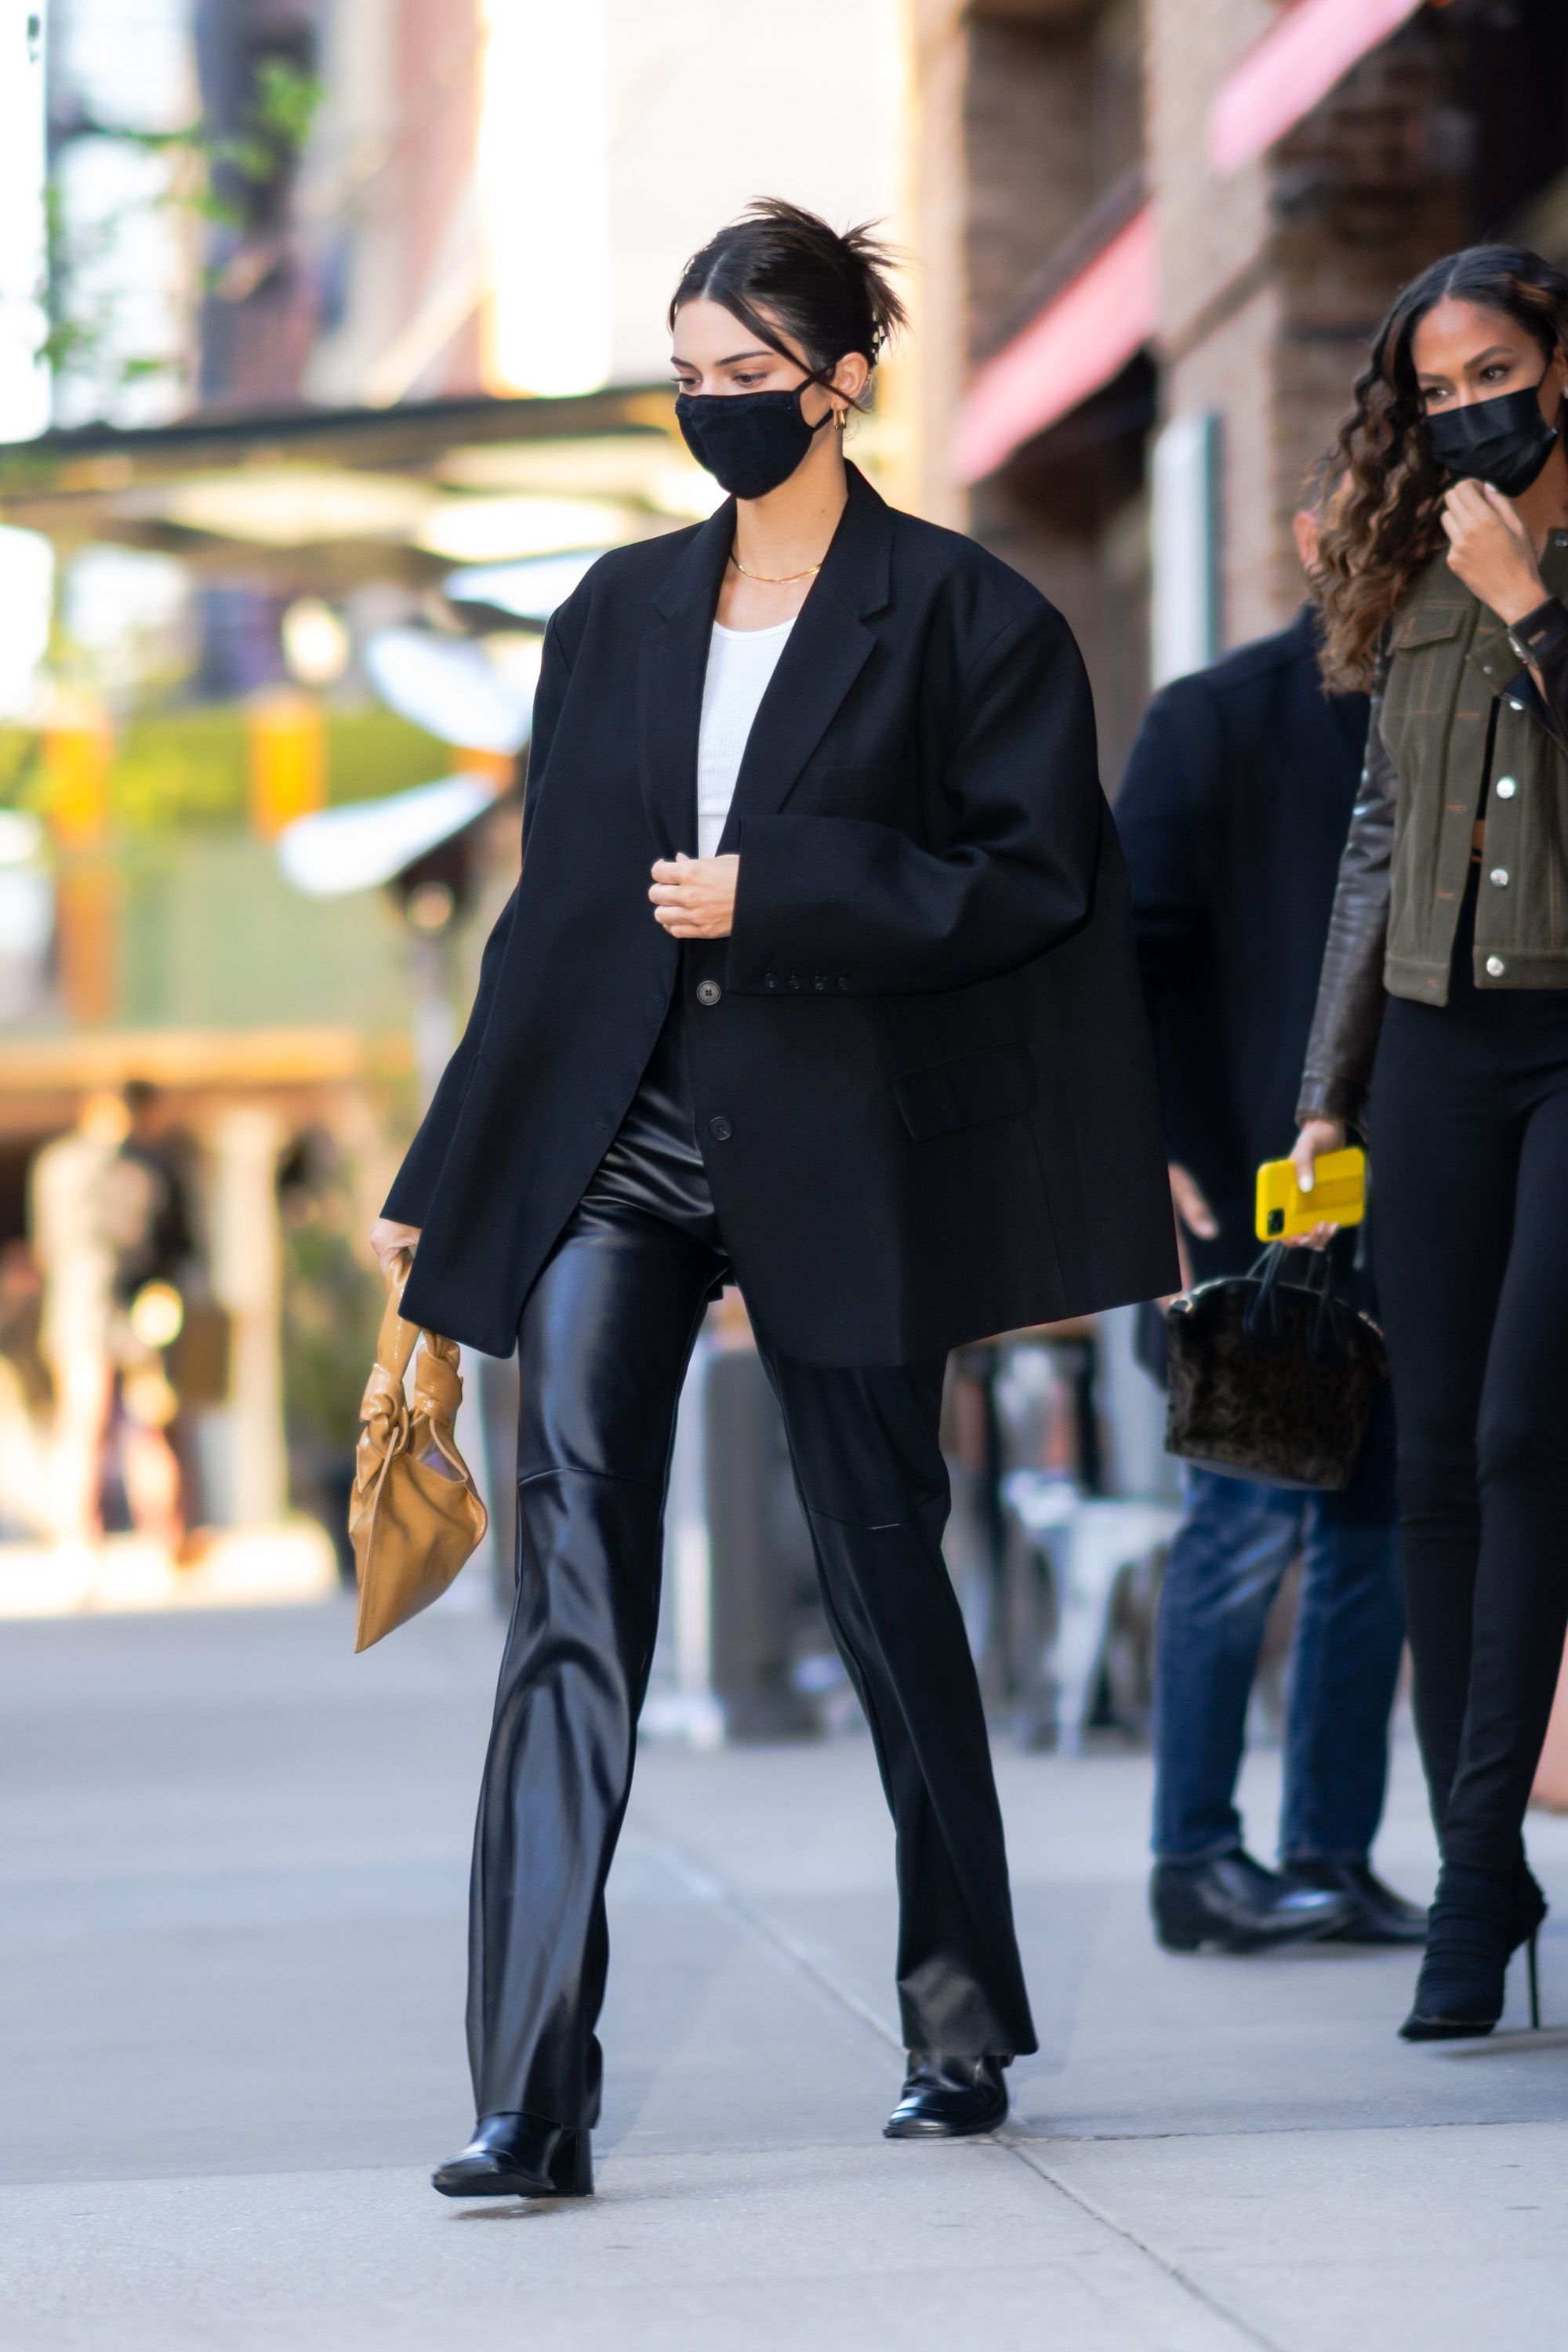 NEW YORK NEW YORK  APRIL 26 Kendall Jenner and Joan Smalls are seen in Tribeca on April 26 2021 in New York City.